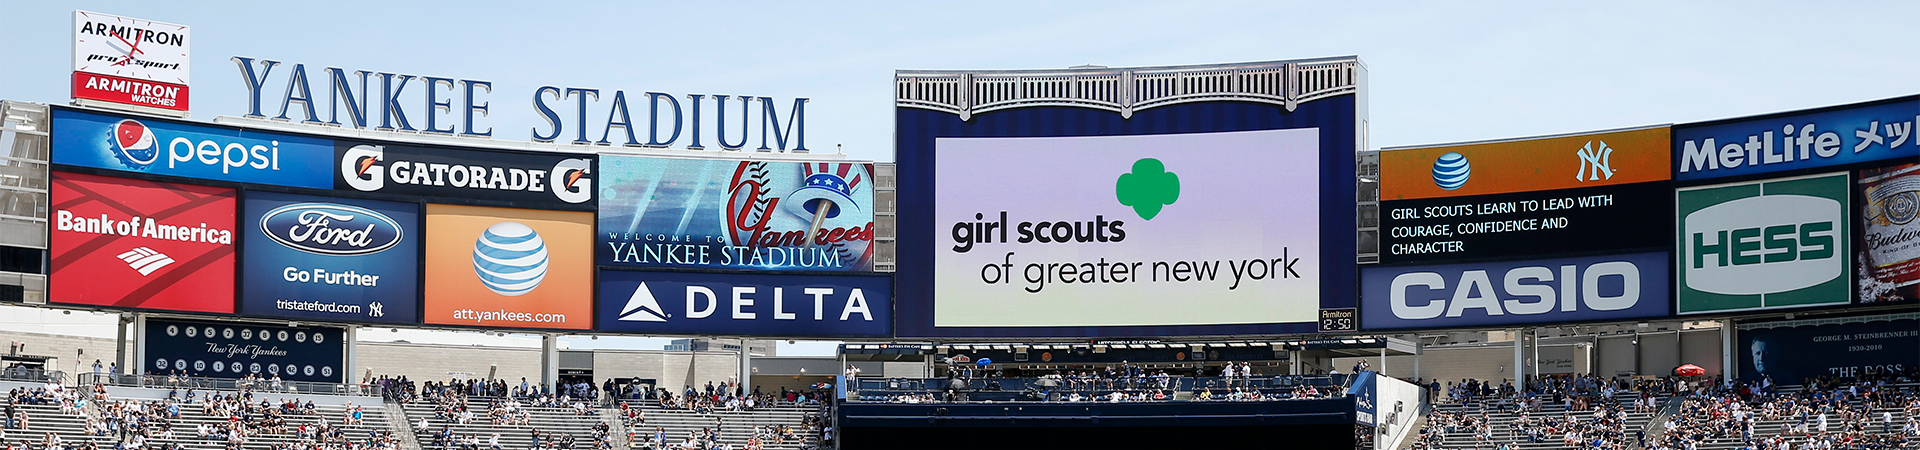  Yankee Stadium stands. Girl Scouts of Greater New York logo displayed on the jumbotron screen. 